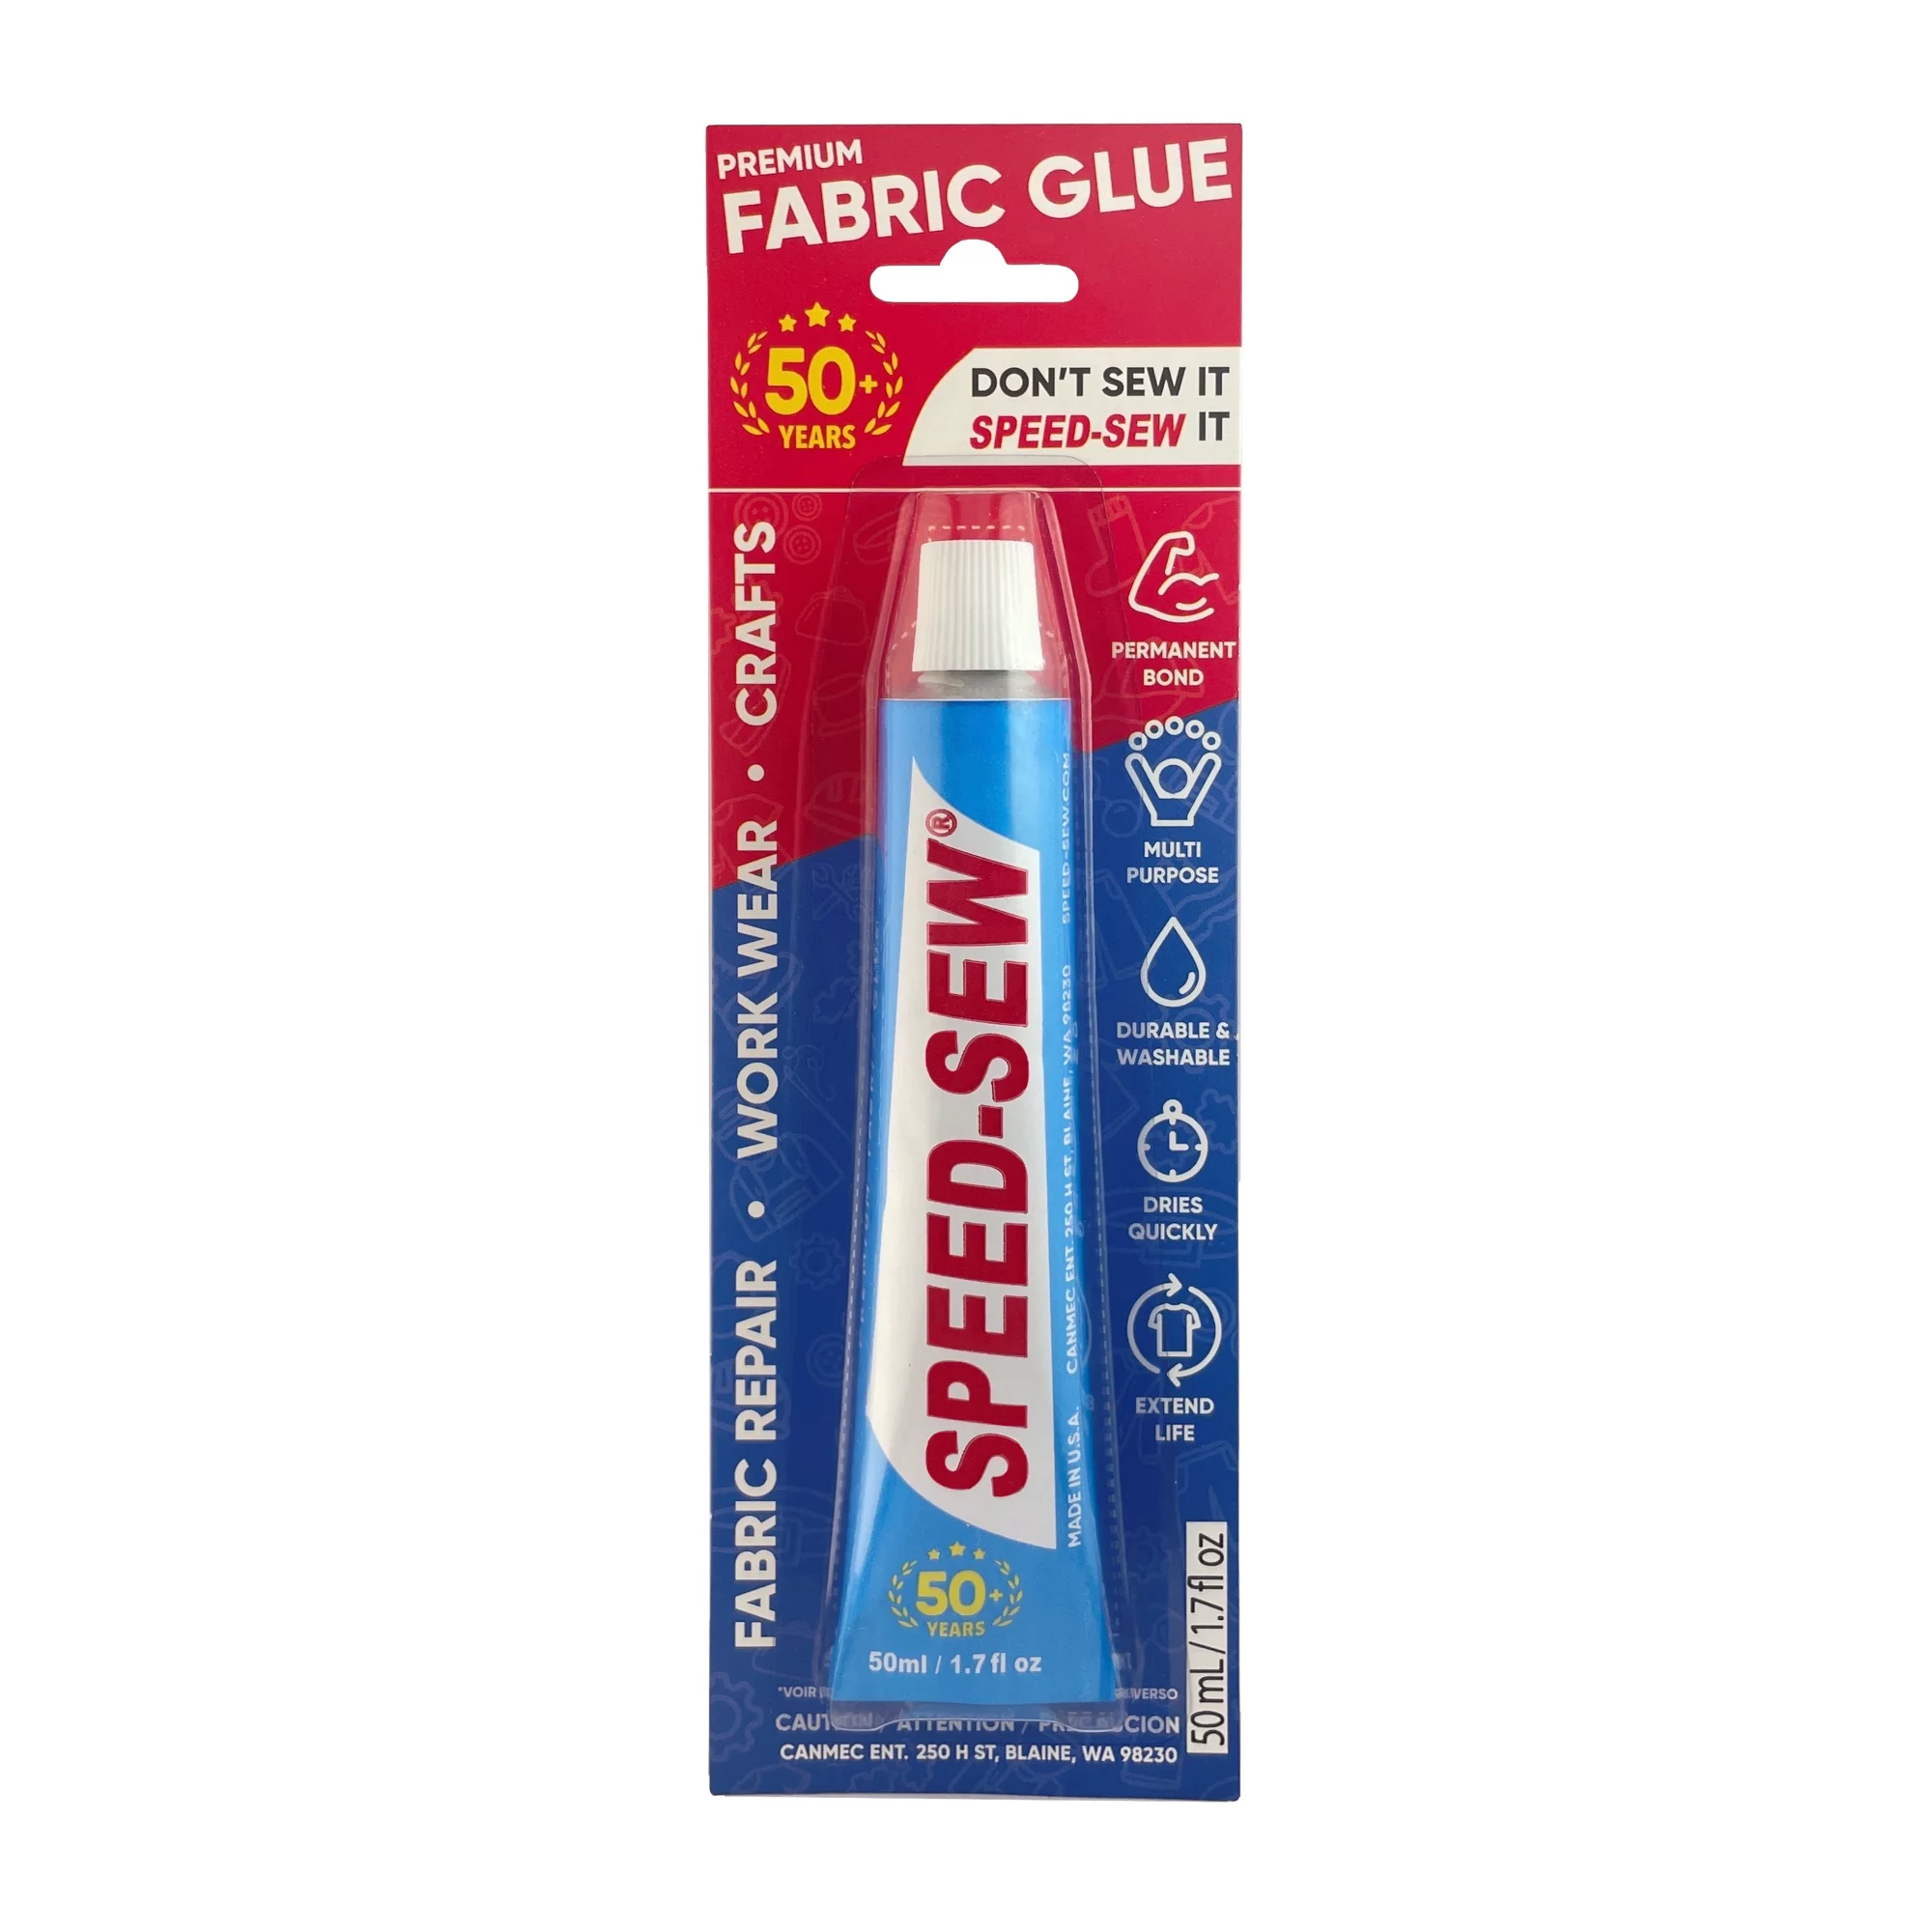 Fabric Glue Waterproof Sew Glue Bonding Patch Sewing Solution for